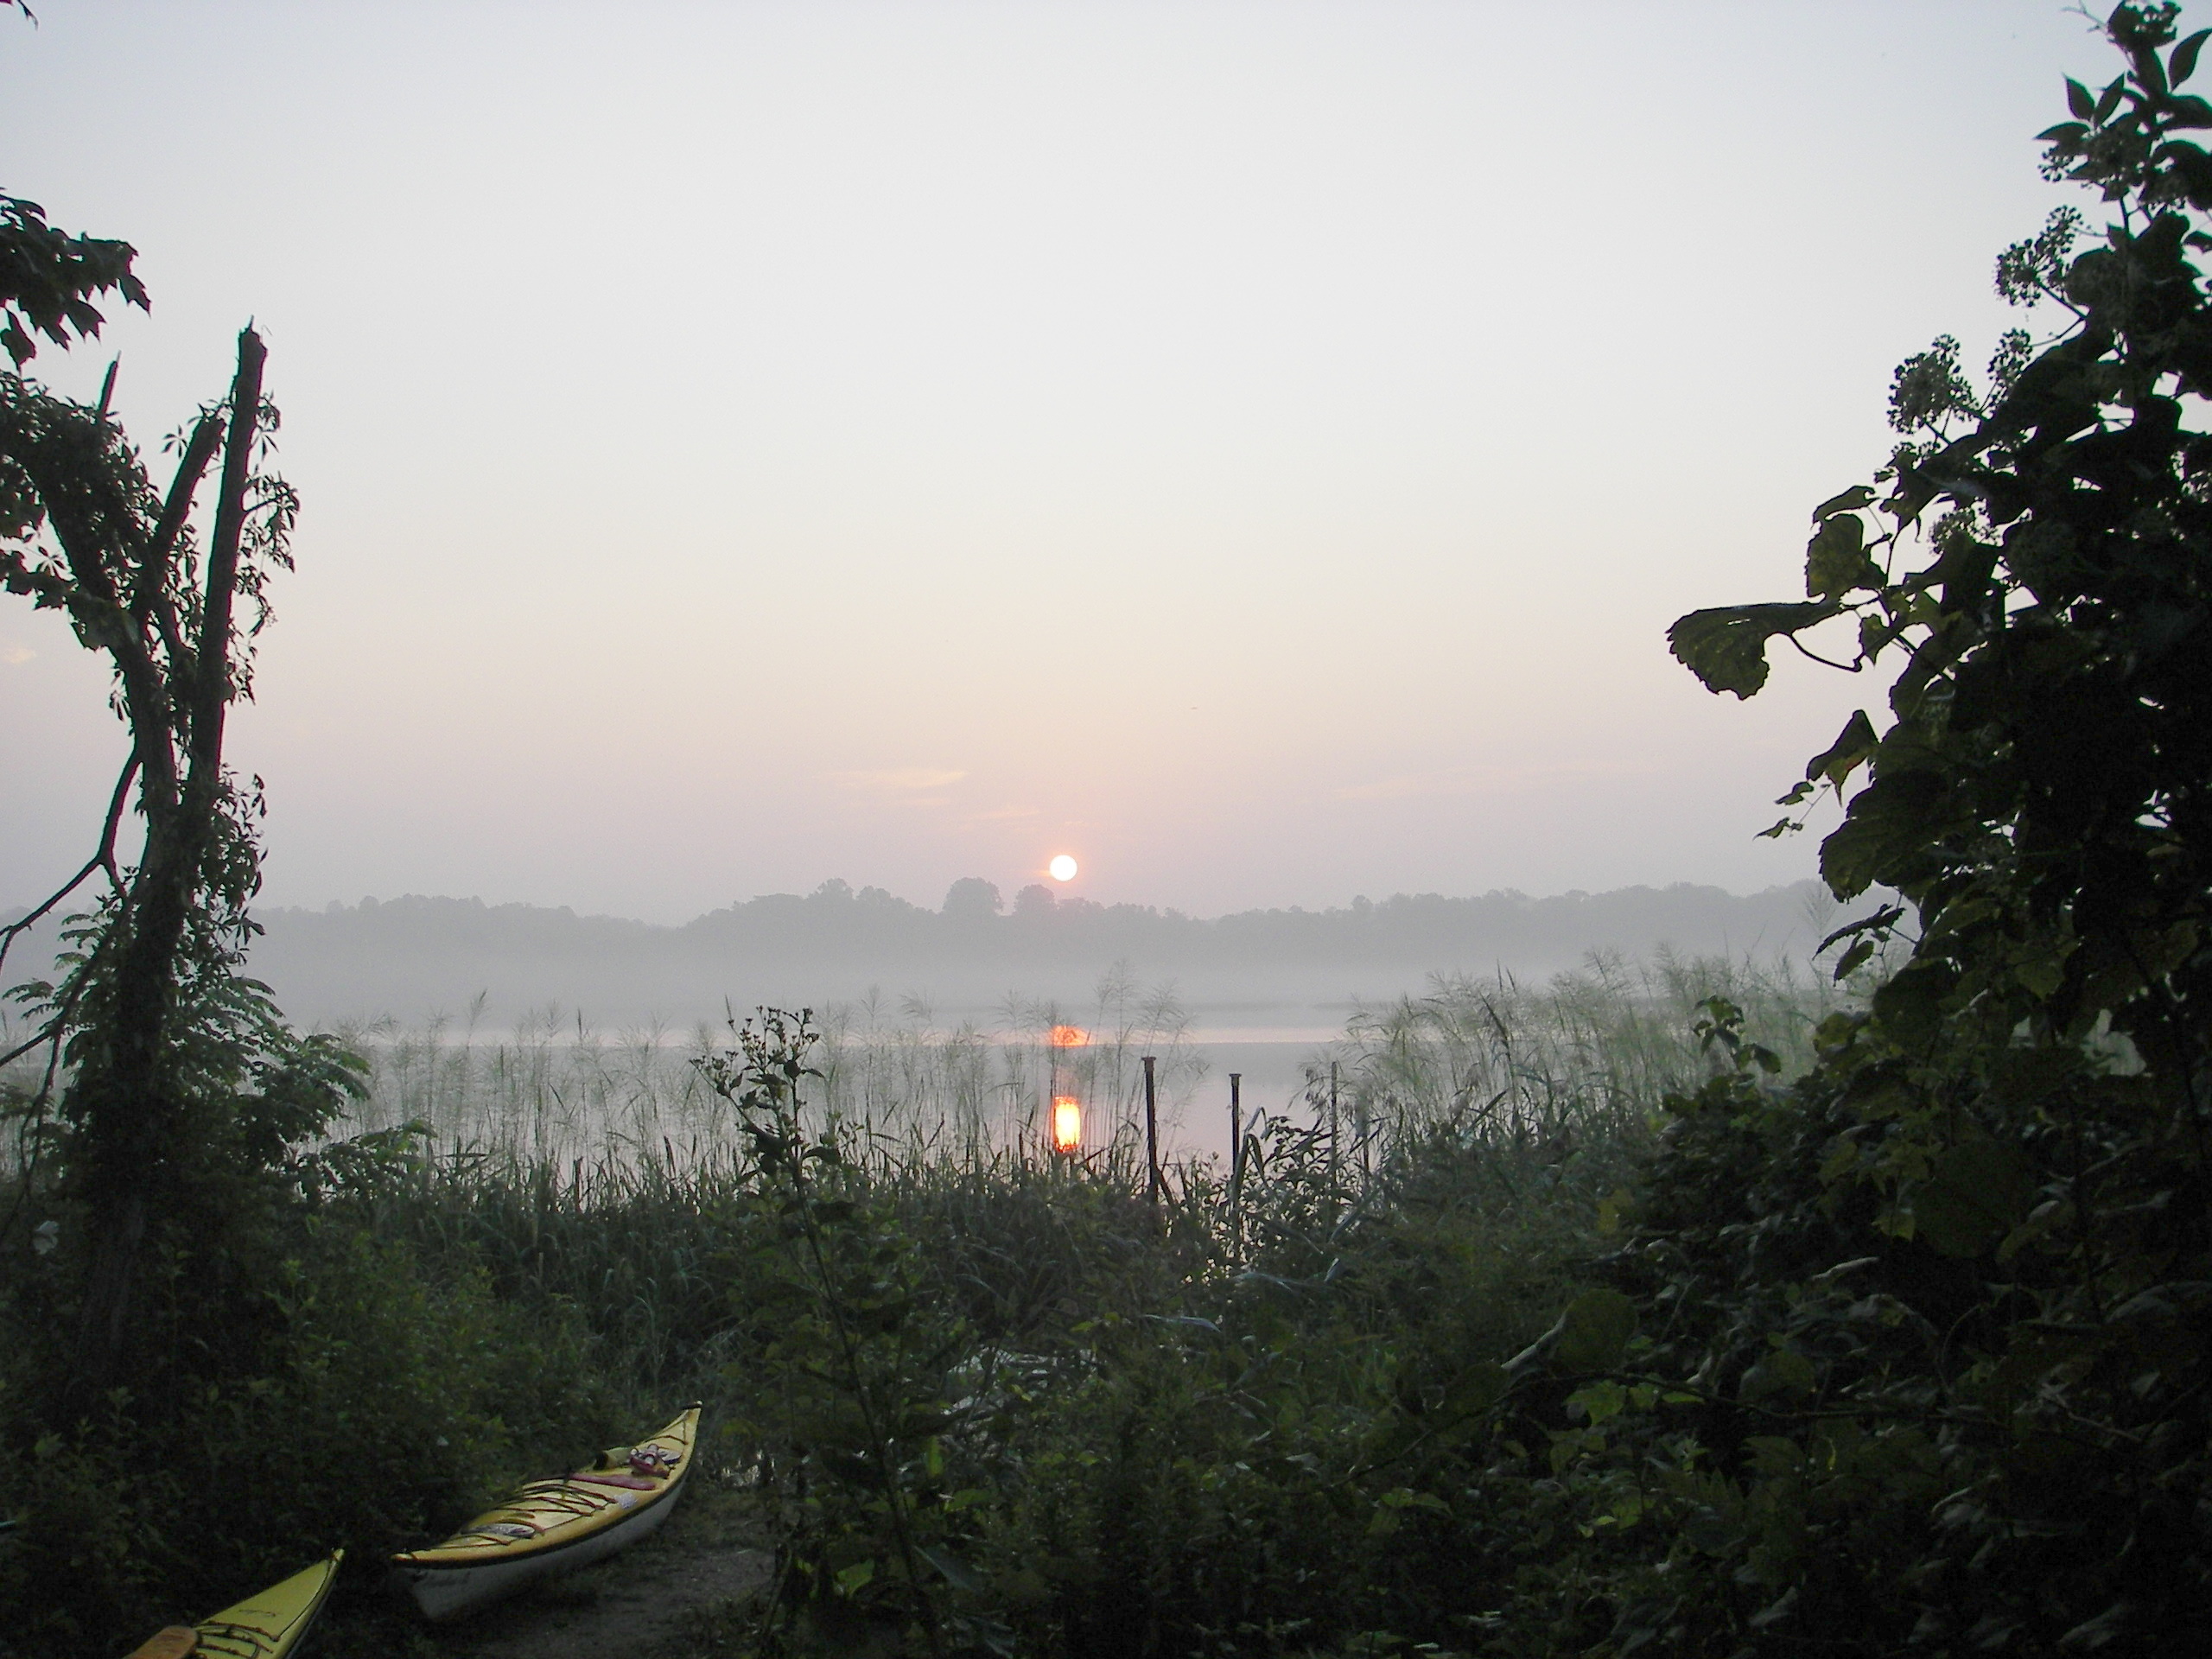 Patuxent Sunrise at Selby Canoe Camp 2007